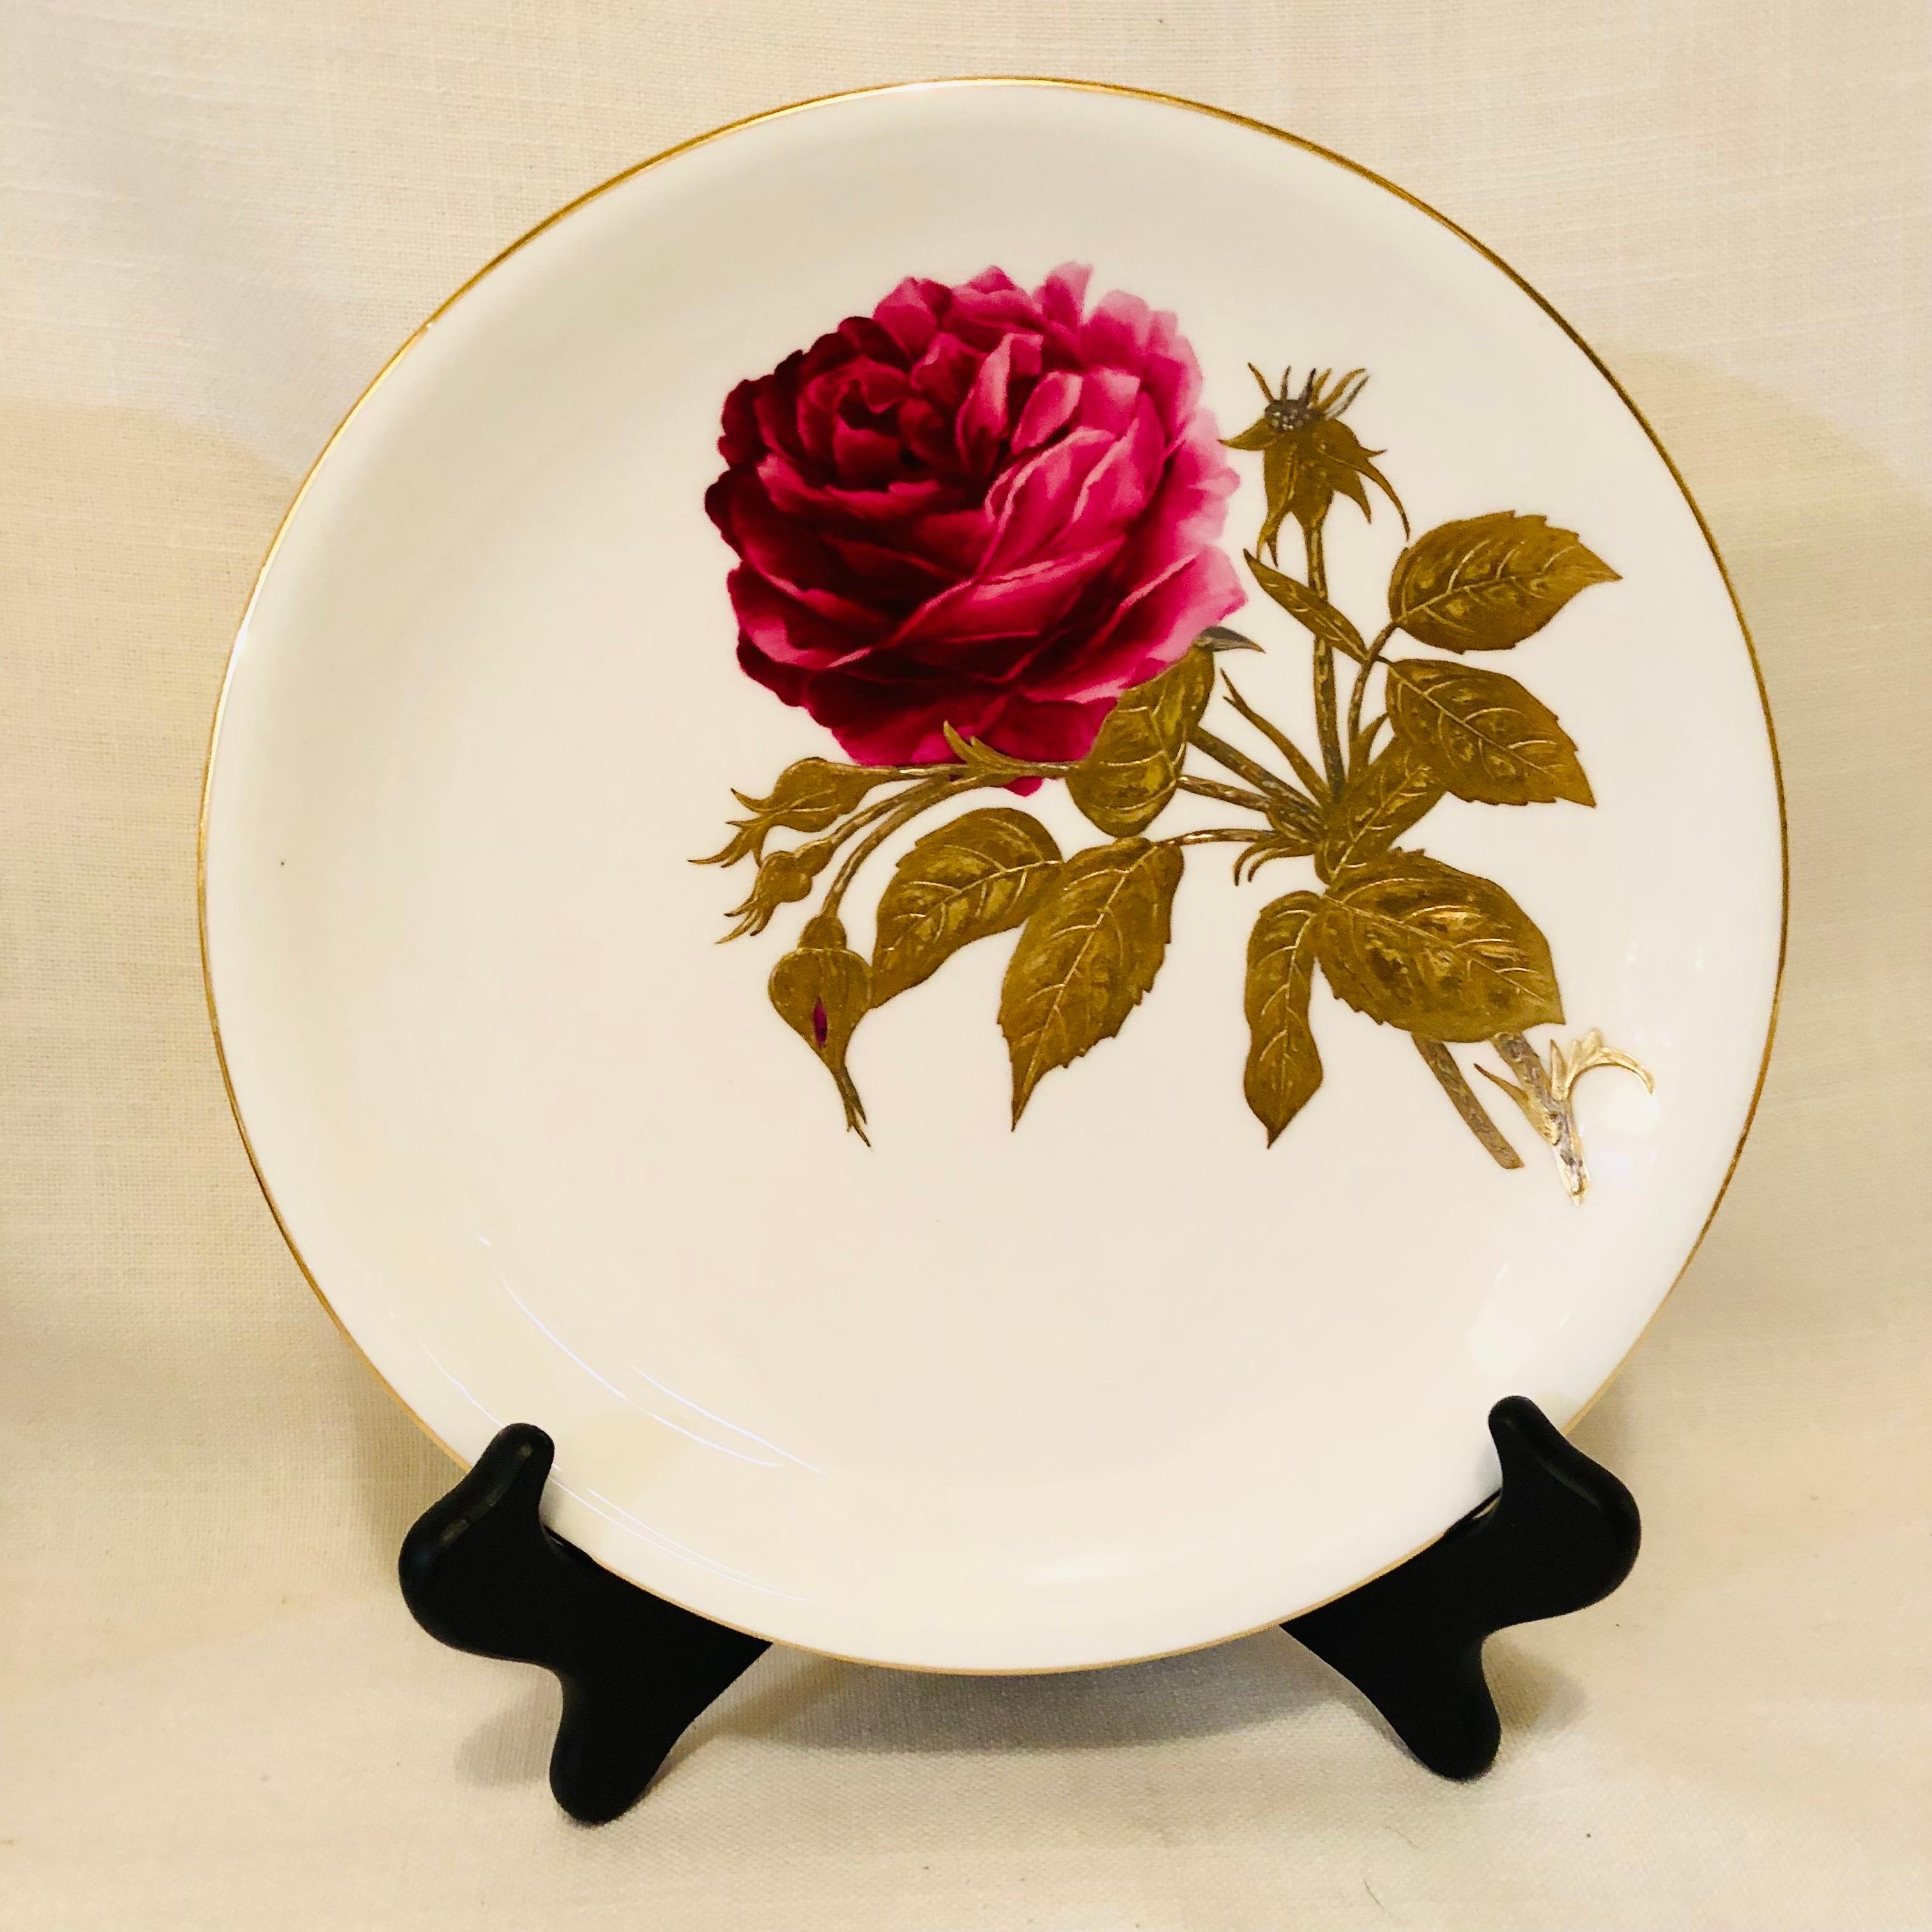 Minton Plates Each Painted With a Different Rose With Gold and Platinum Accents 4